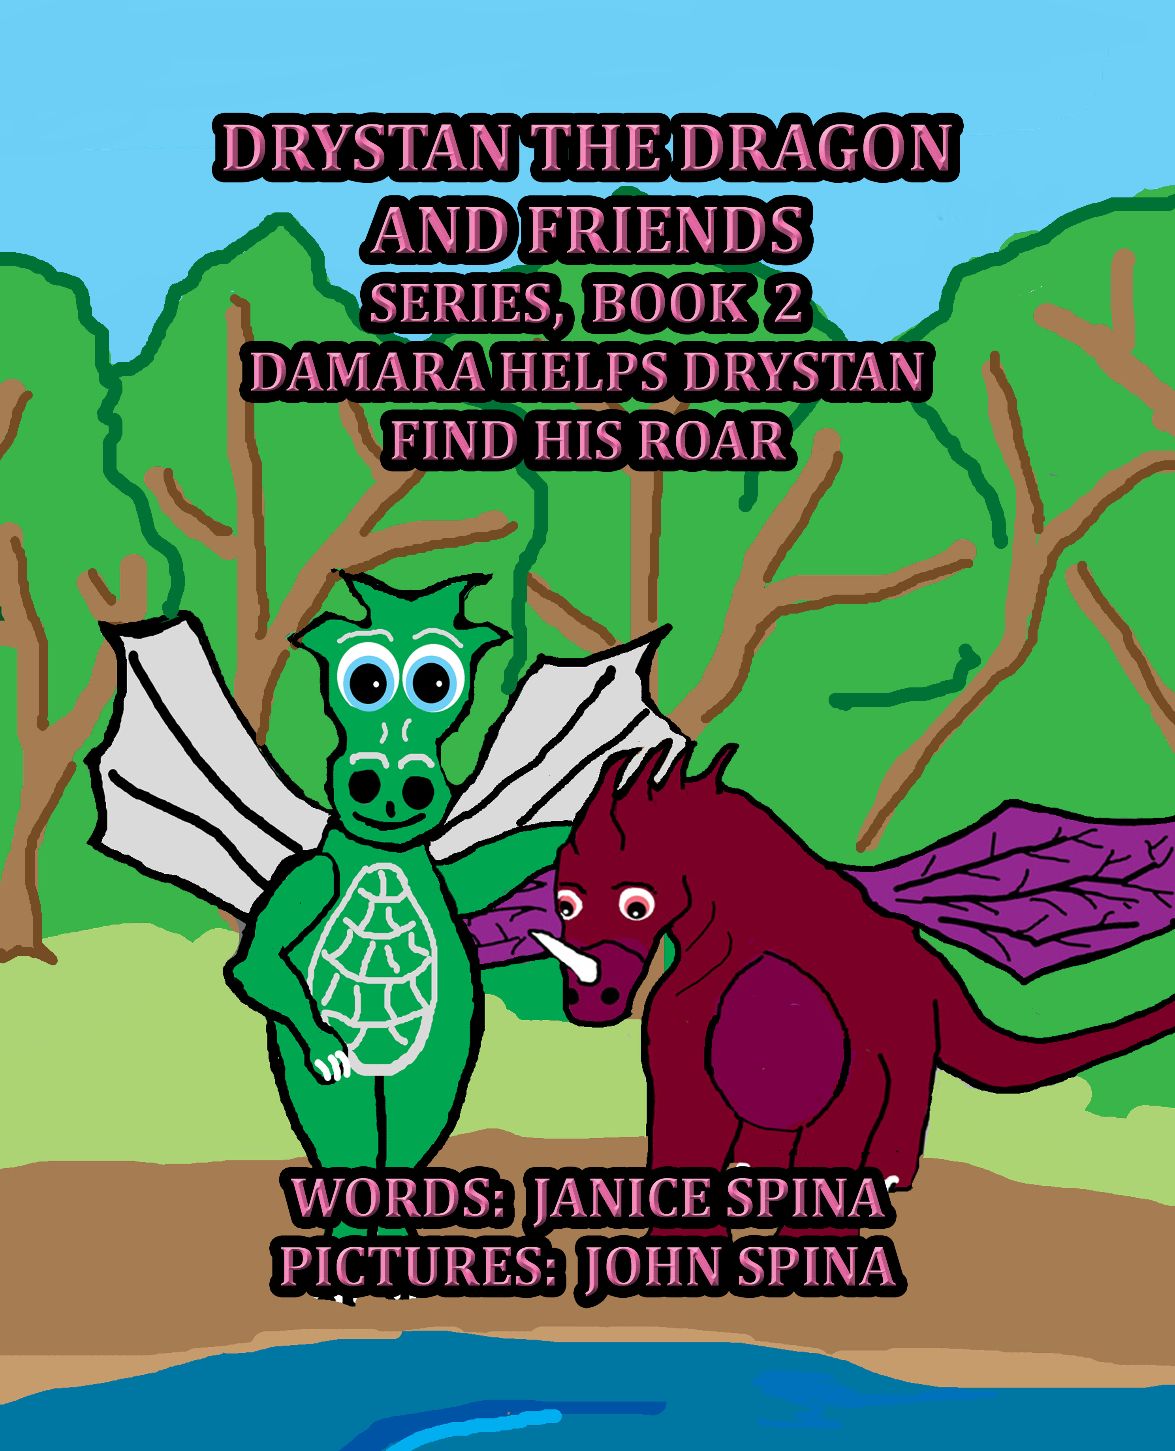 New Book Cover Reveal – Drystan the Dragon and Friends Series, Book 2 is Now Here!